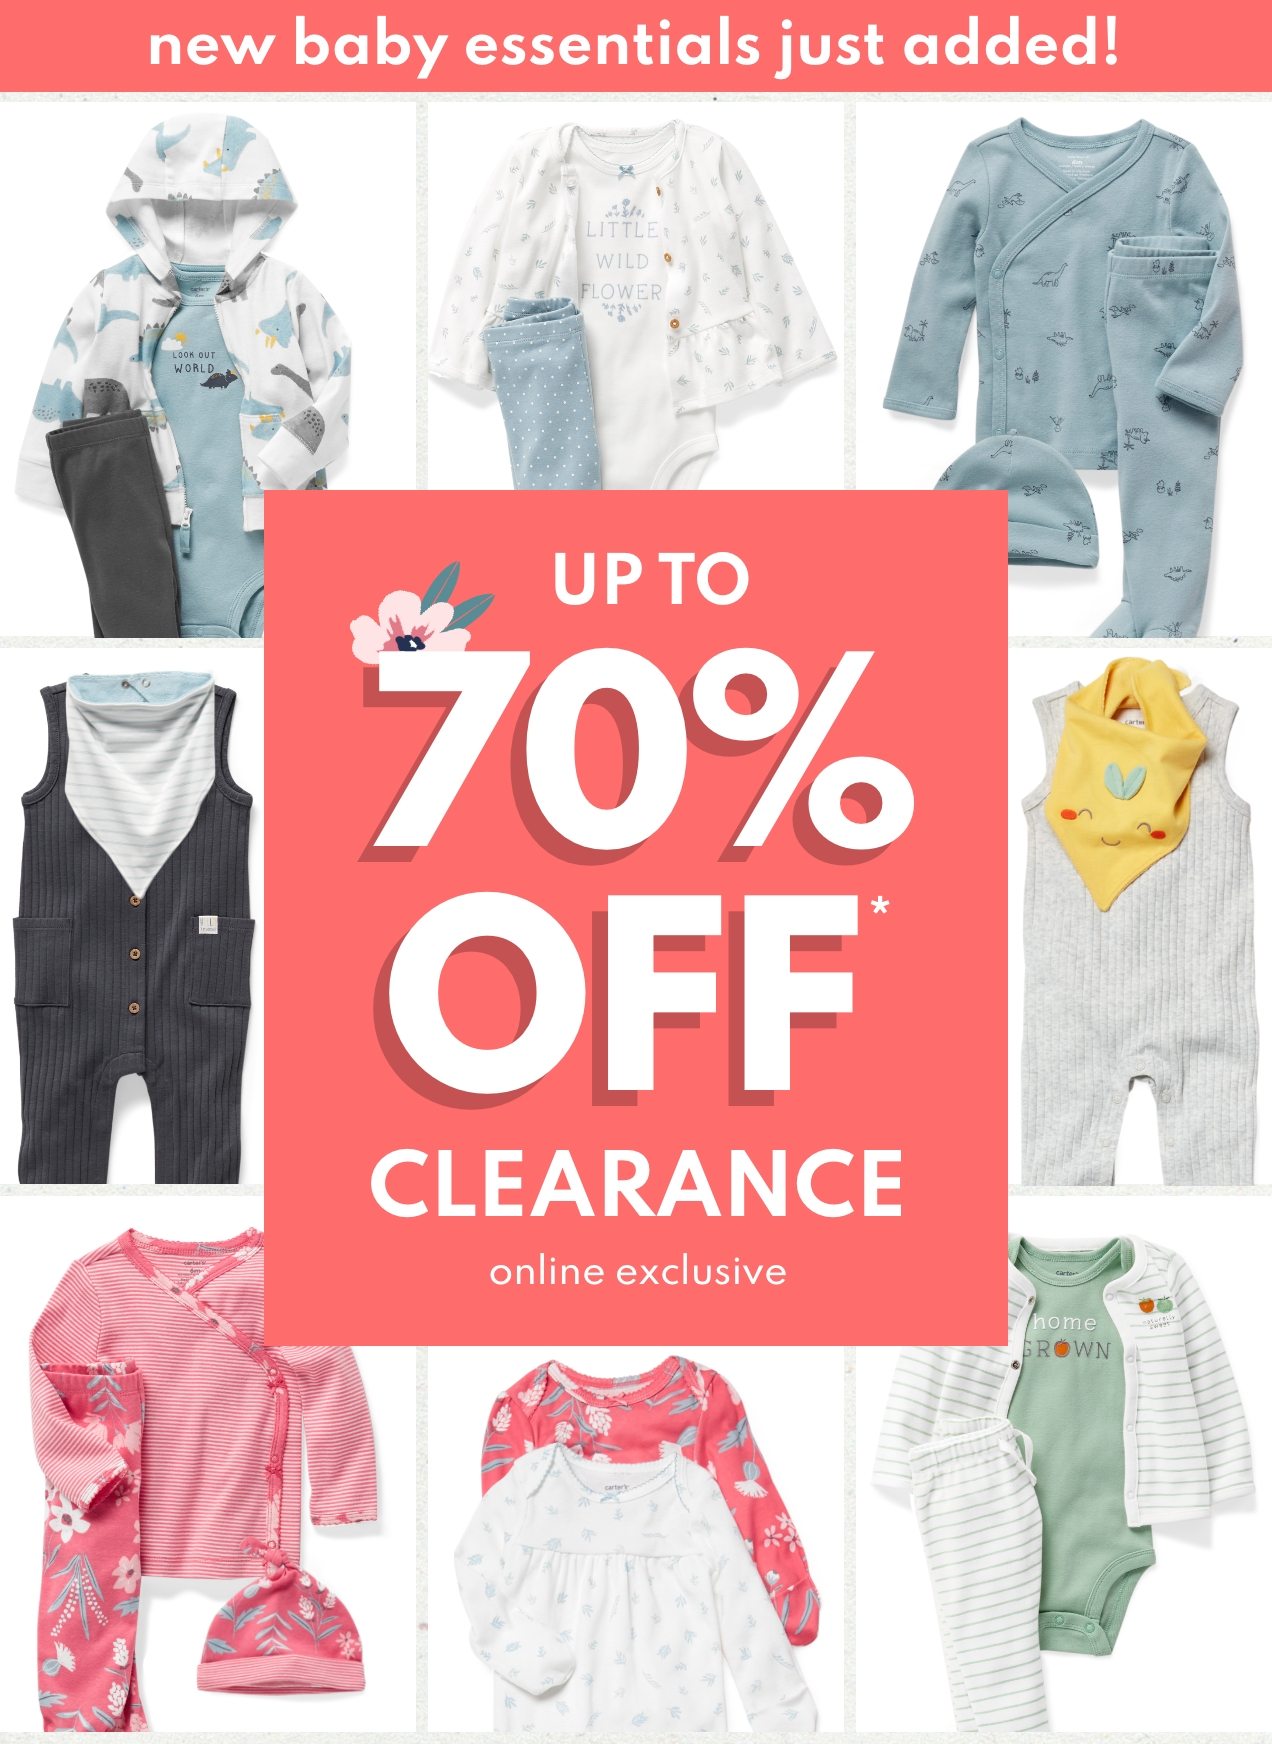 new baby essentials just added! | UP TO 70% OFF* CLEARANCE online exclusive 